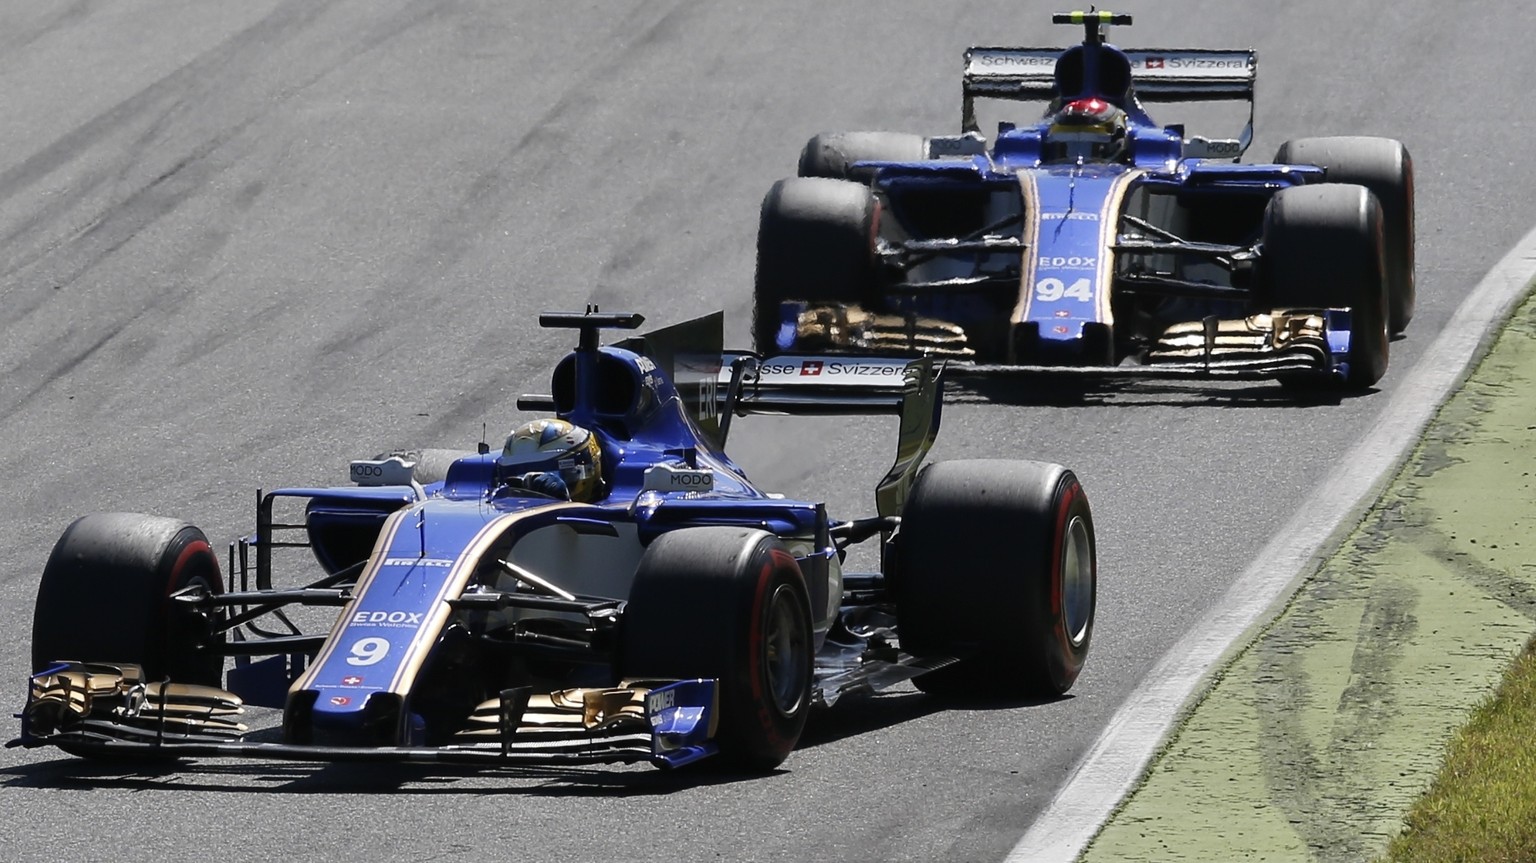 Sauber driver Marcus Ericsson of Sweden leads Sauber driver Pascal Wehrlein of Germany during the Italian Formula One Grand Prix, at the Monza racetrack, Italy, Sunday, Sept. 3, 2017. (AP Photo/Antoni ...